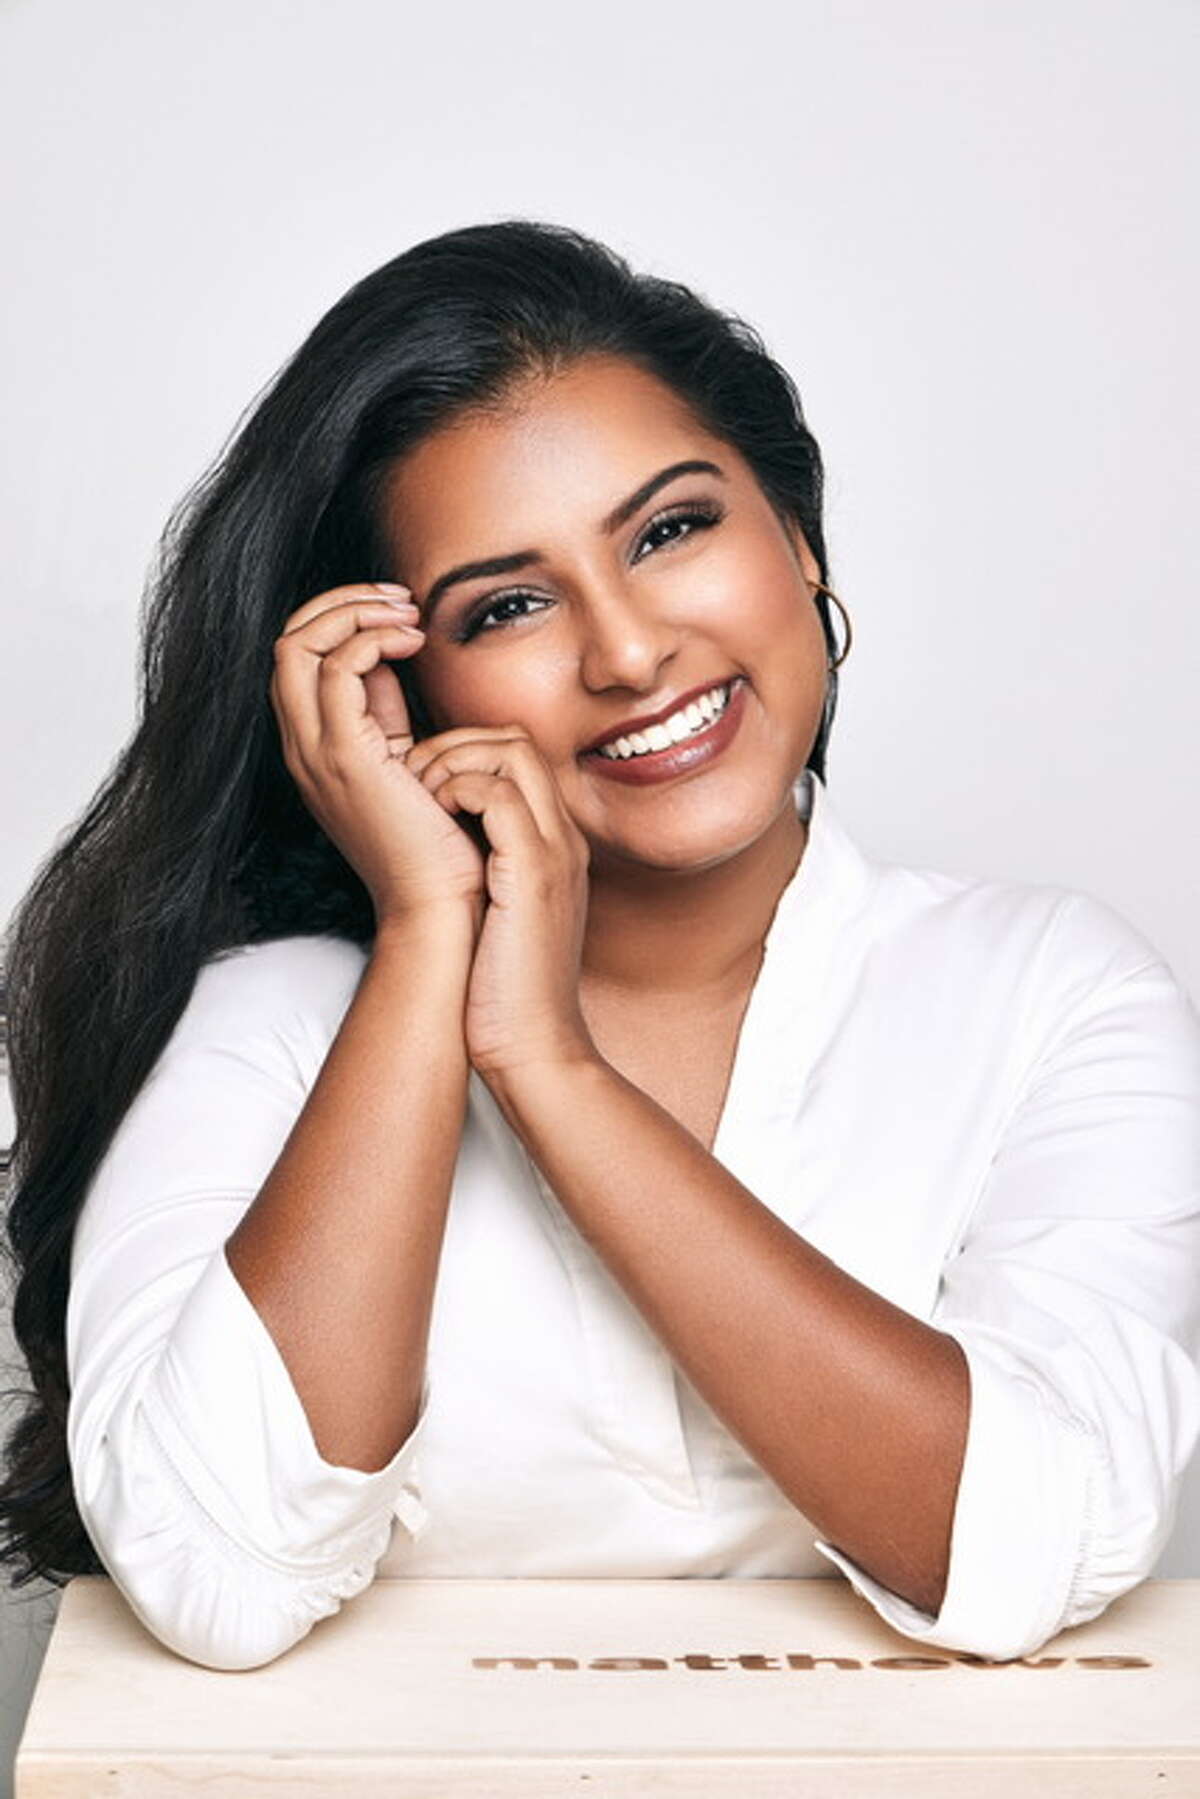 Sapna Raghavan of Ellington, won the title of Miss Connecticut 2021 and will compete for the Miss America title on Dec. 16 at Mohegan Sun Arena.